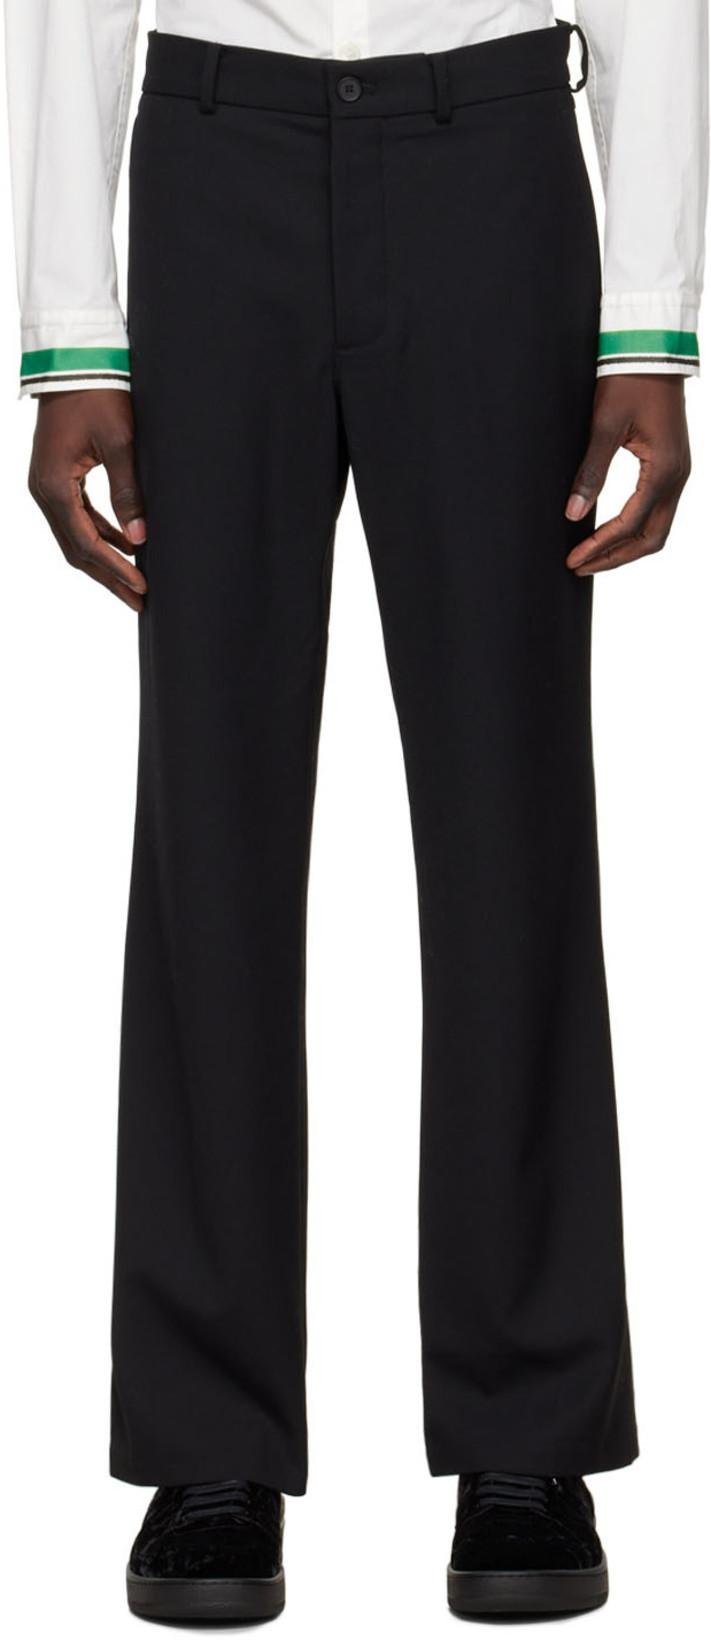 Black Wool Trousers by A PERSONAL NOTE 73